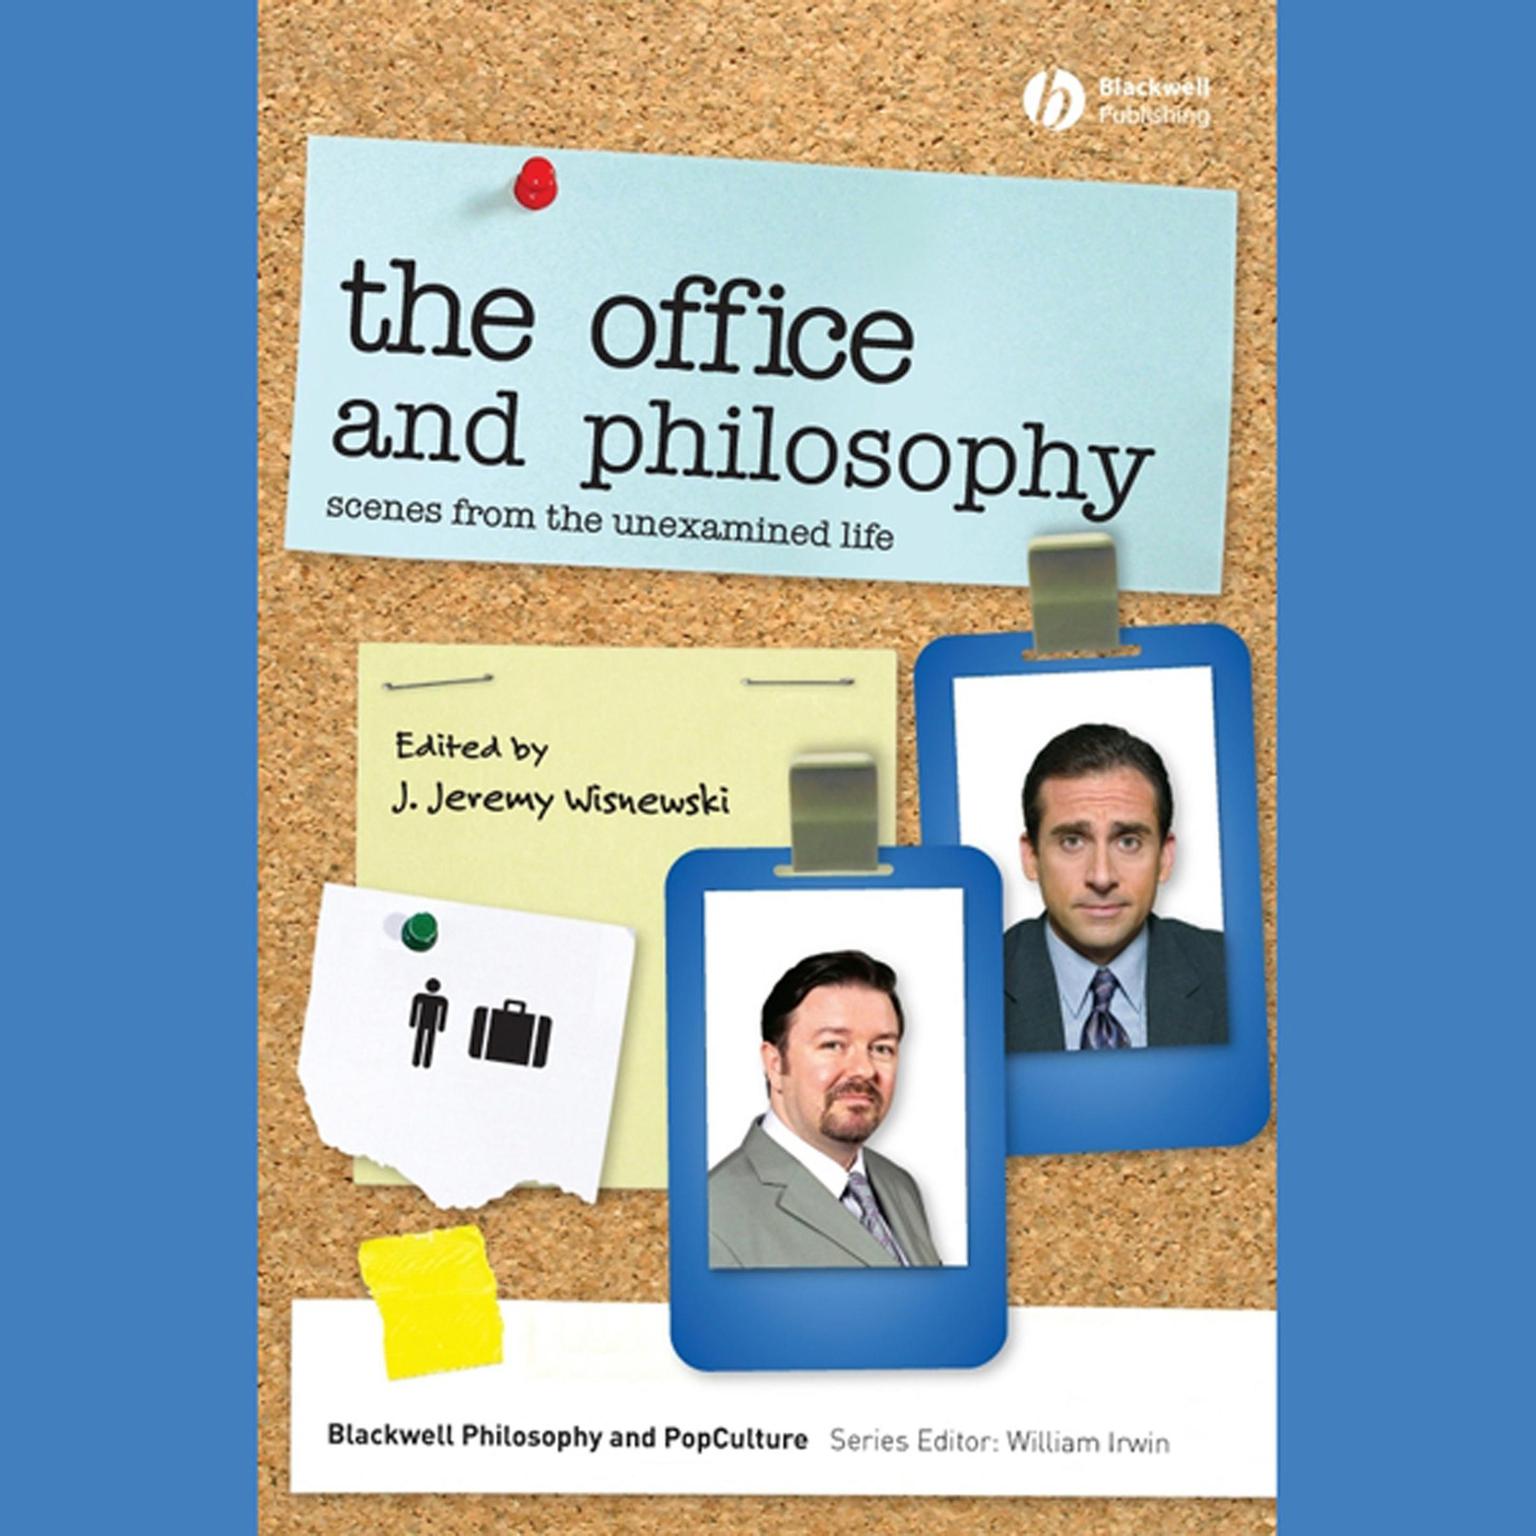 The Office and Philosophy: Scenes from the Unexamined Life Audiobook, by J. Jeremy Wisnewski